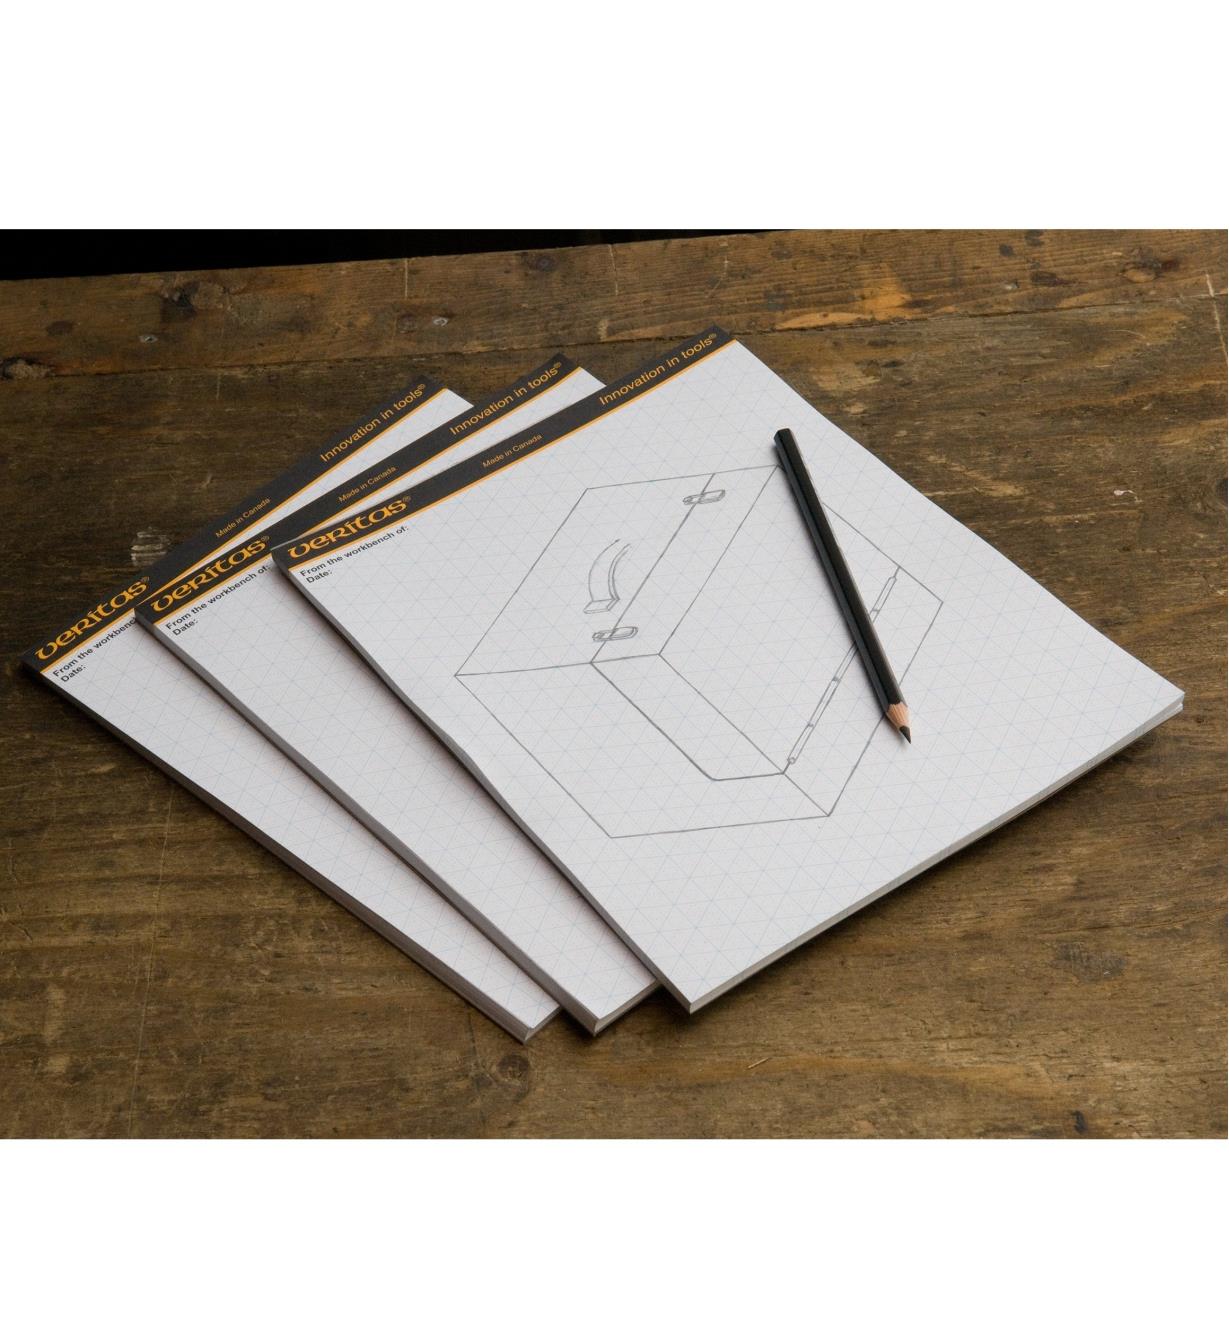 Three 8 1/2" x 11" Drawing Pads fanned on a table